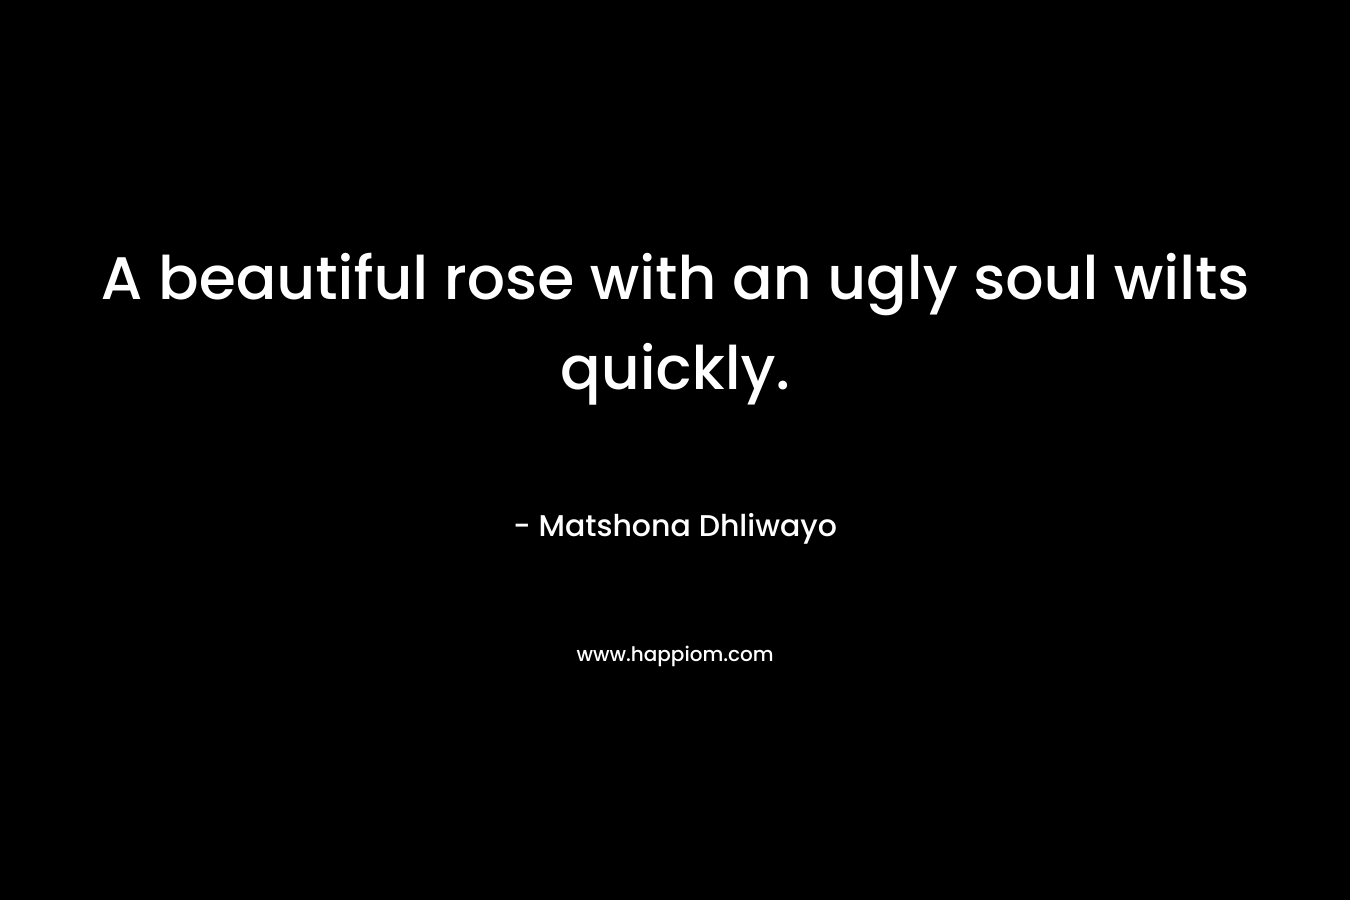 A beautiful rose with an ugly soul wilts quickly.